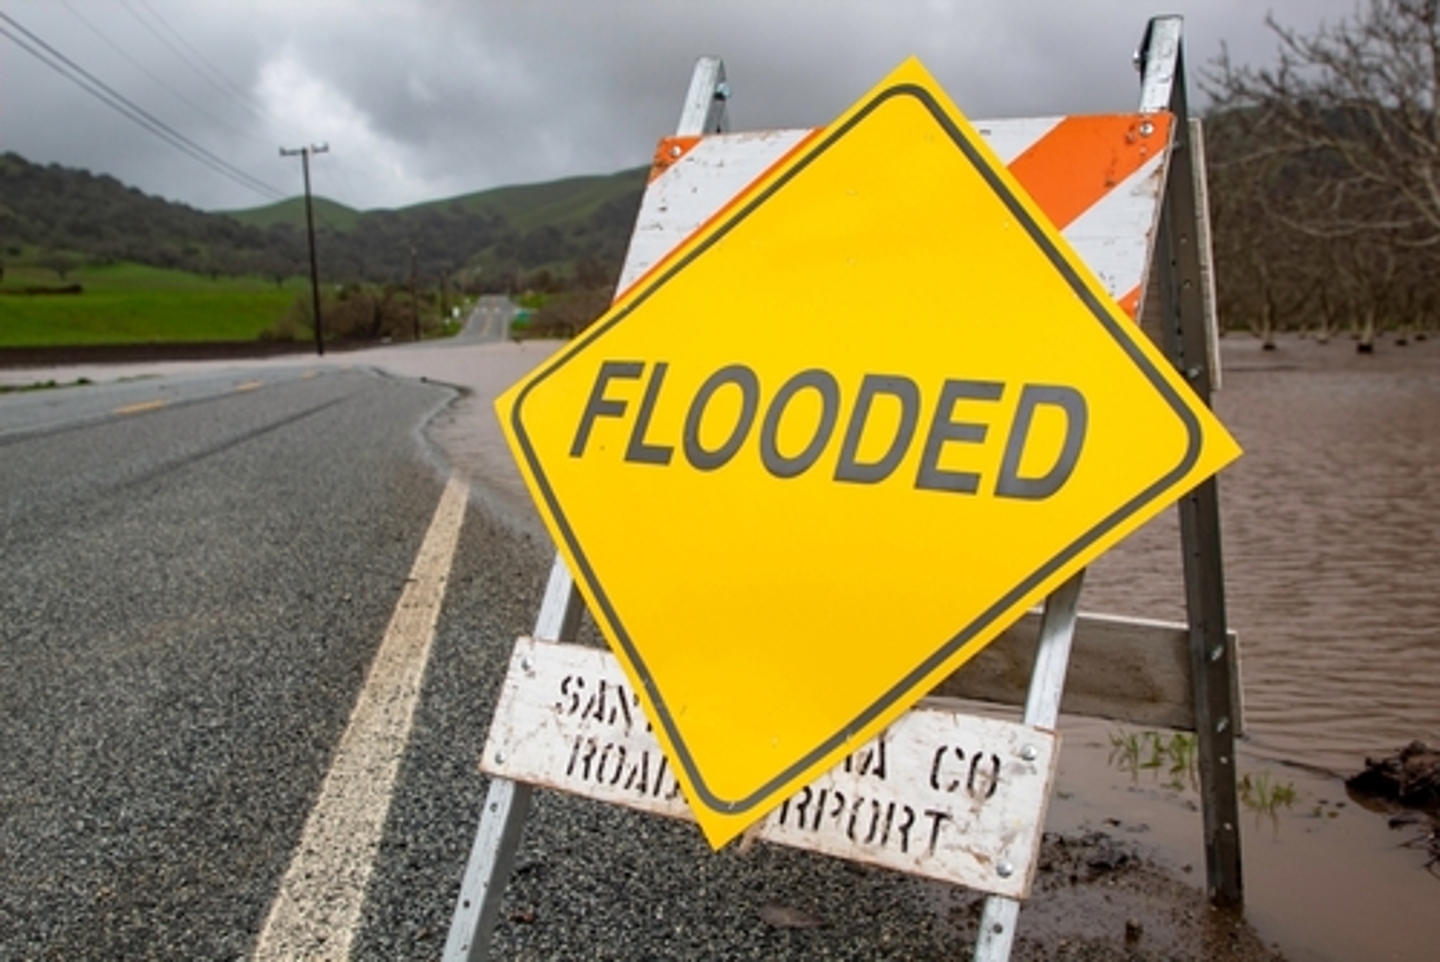 A flood watch and a flood warning are two very different weather events. If you suffer flood damage, call SERVPRO®. We offer 24-hour emergency services for water damage restoration and emergency water extraction.